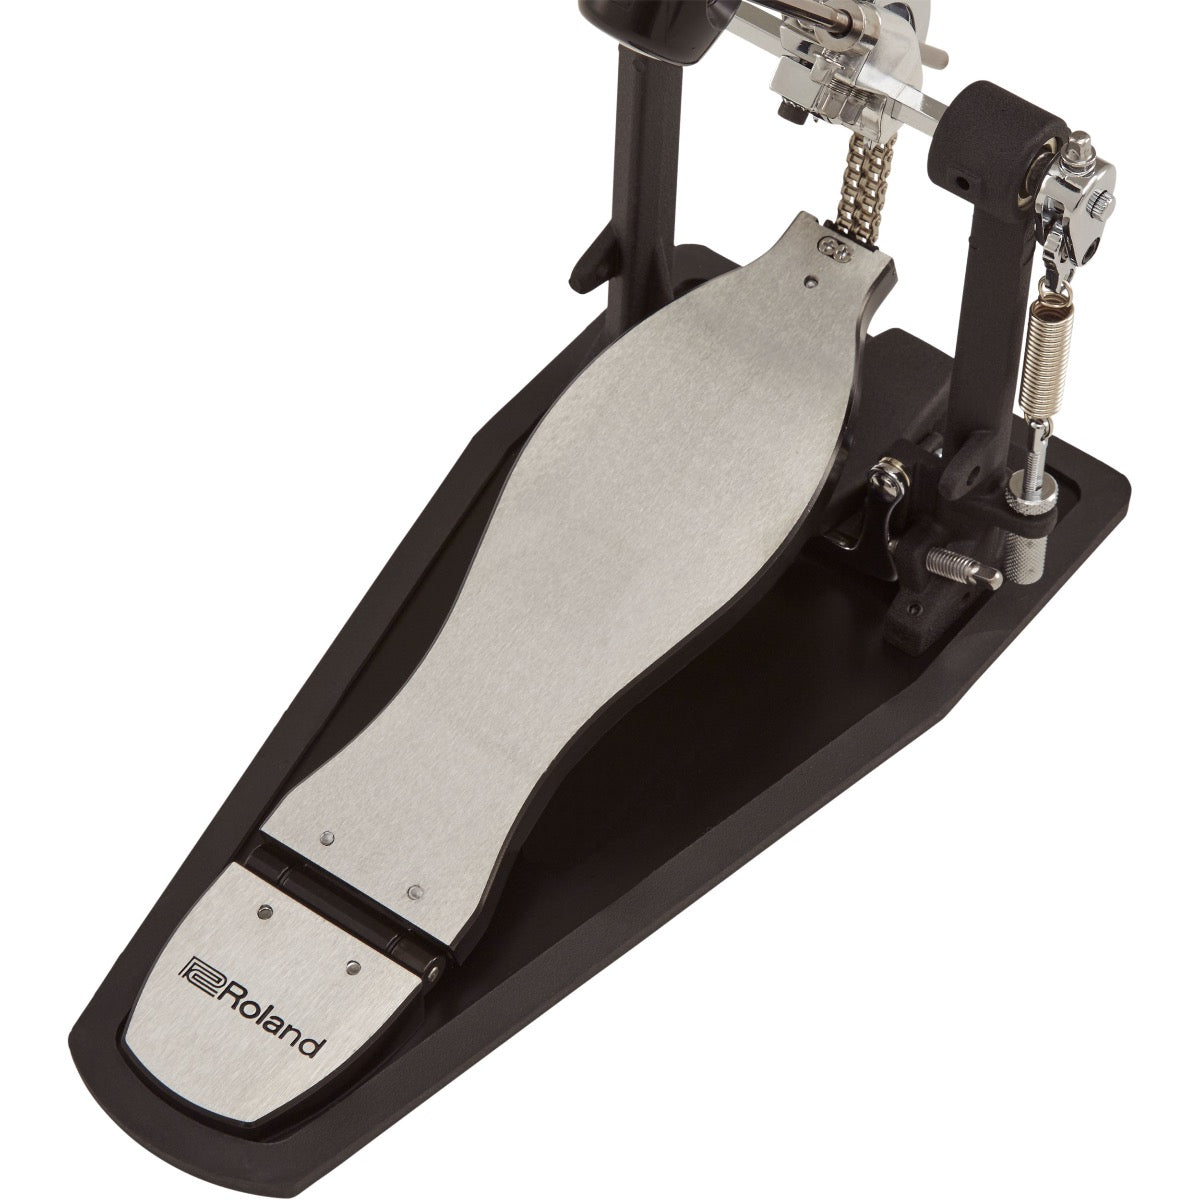 Detail top view of Roland RDH-100A V-Drums Kick Drum Pedal with Noise Eater Technology showing pedal and Roland Noise Eater acoustic noise-reduction rubber cradle